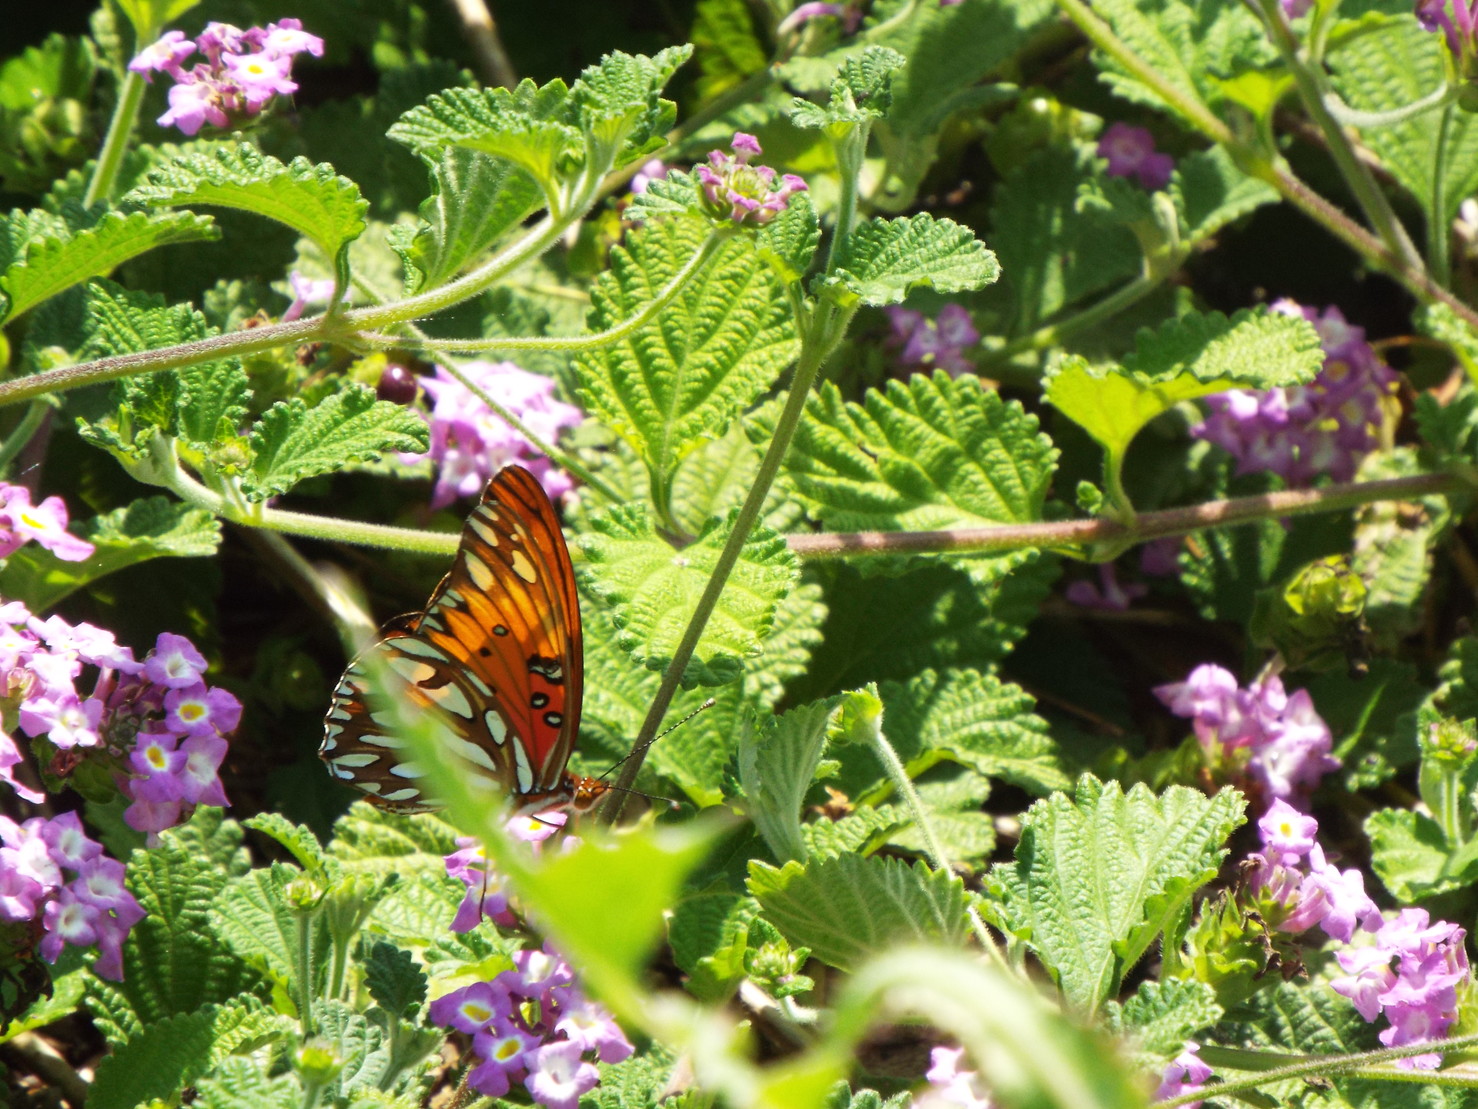 A Gulf Fritillary butterfly. A few weeks ago at the same gardens, I saw tons ...